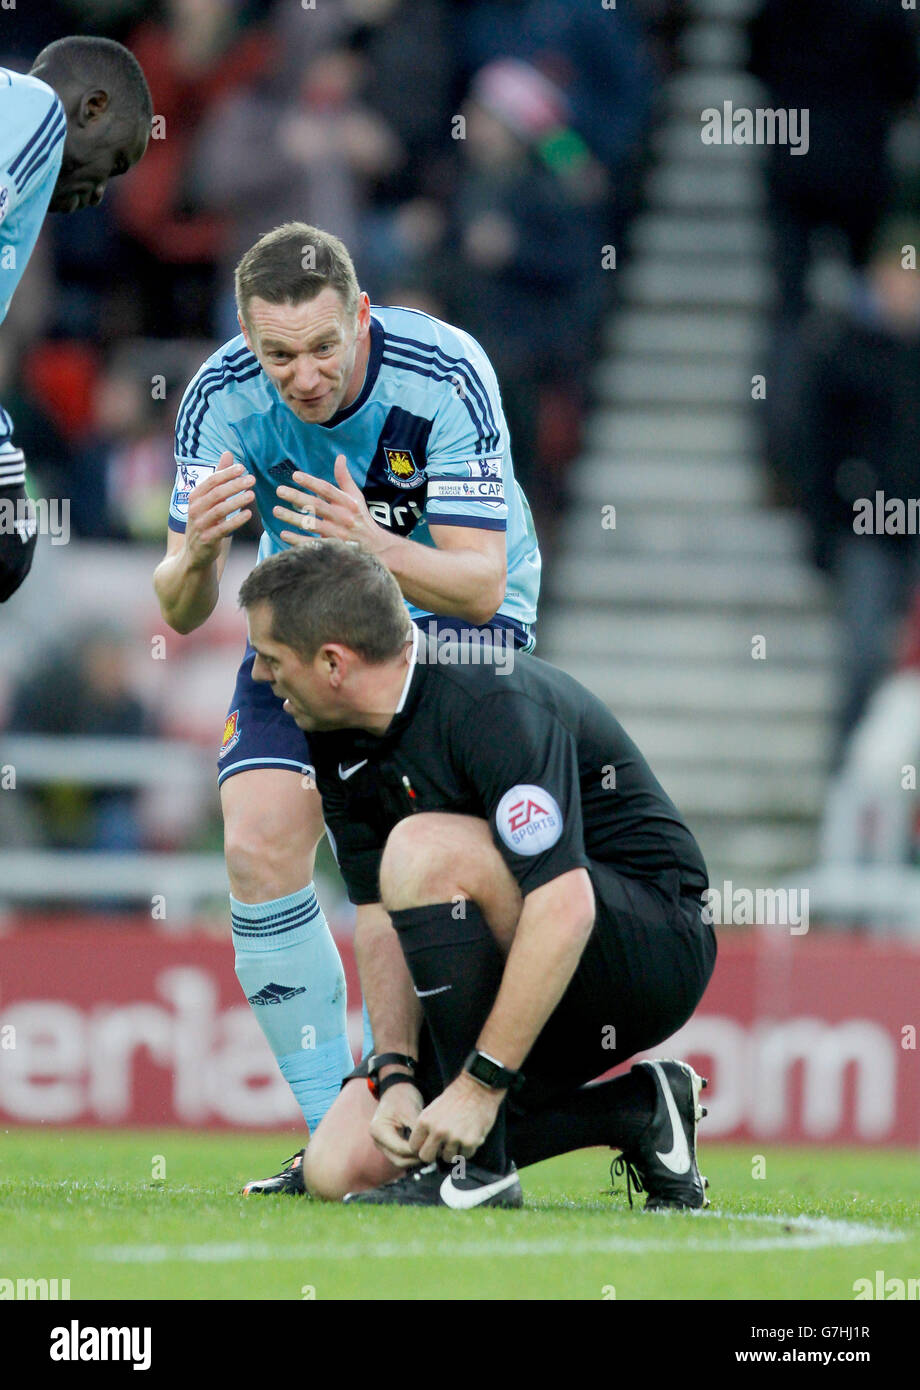 West Ham United's Kevin Nolan pleads with referee Phil Dowd after Sunderland are awarded a penalty during the Barclays Premier League match at the Stadium of Light, Sunderland. Stock Photo